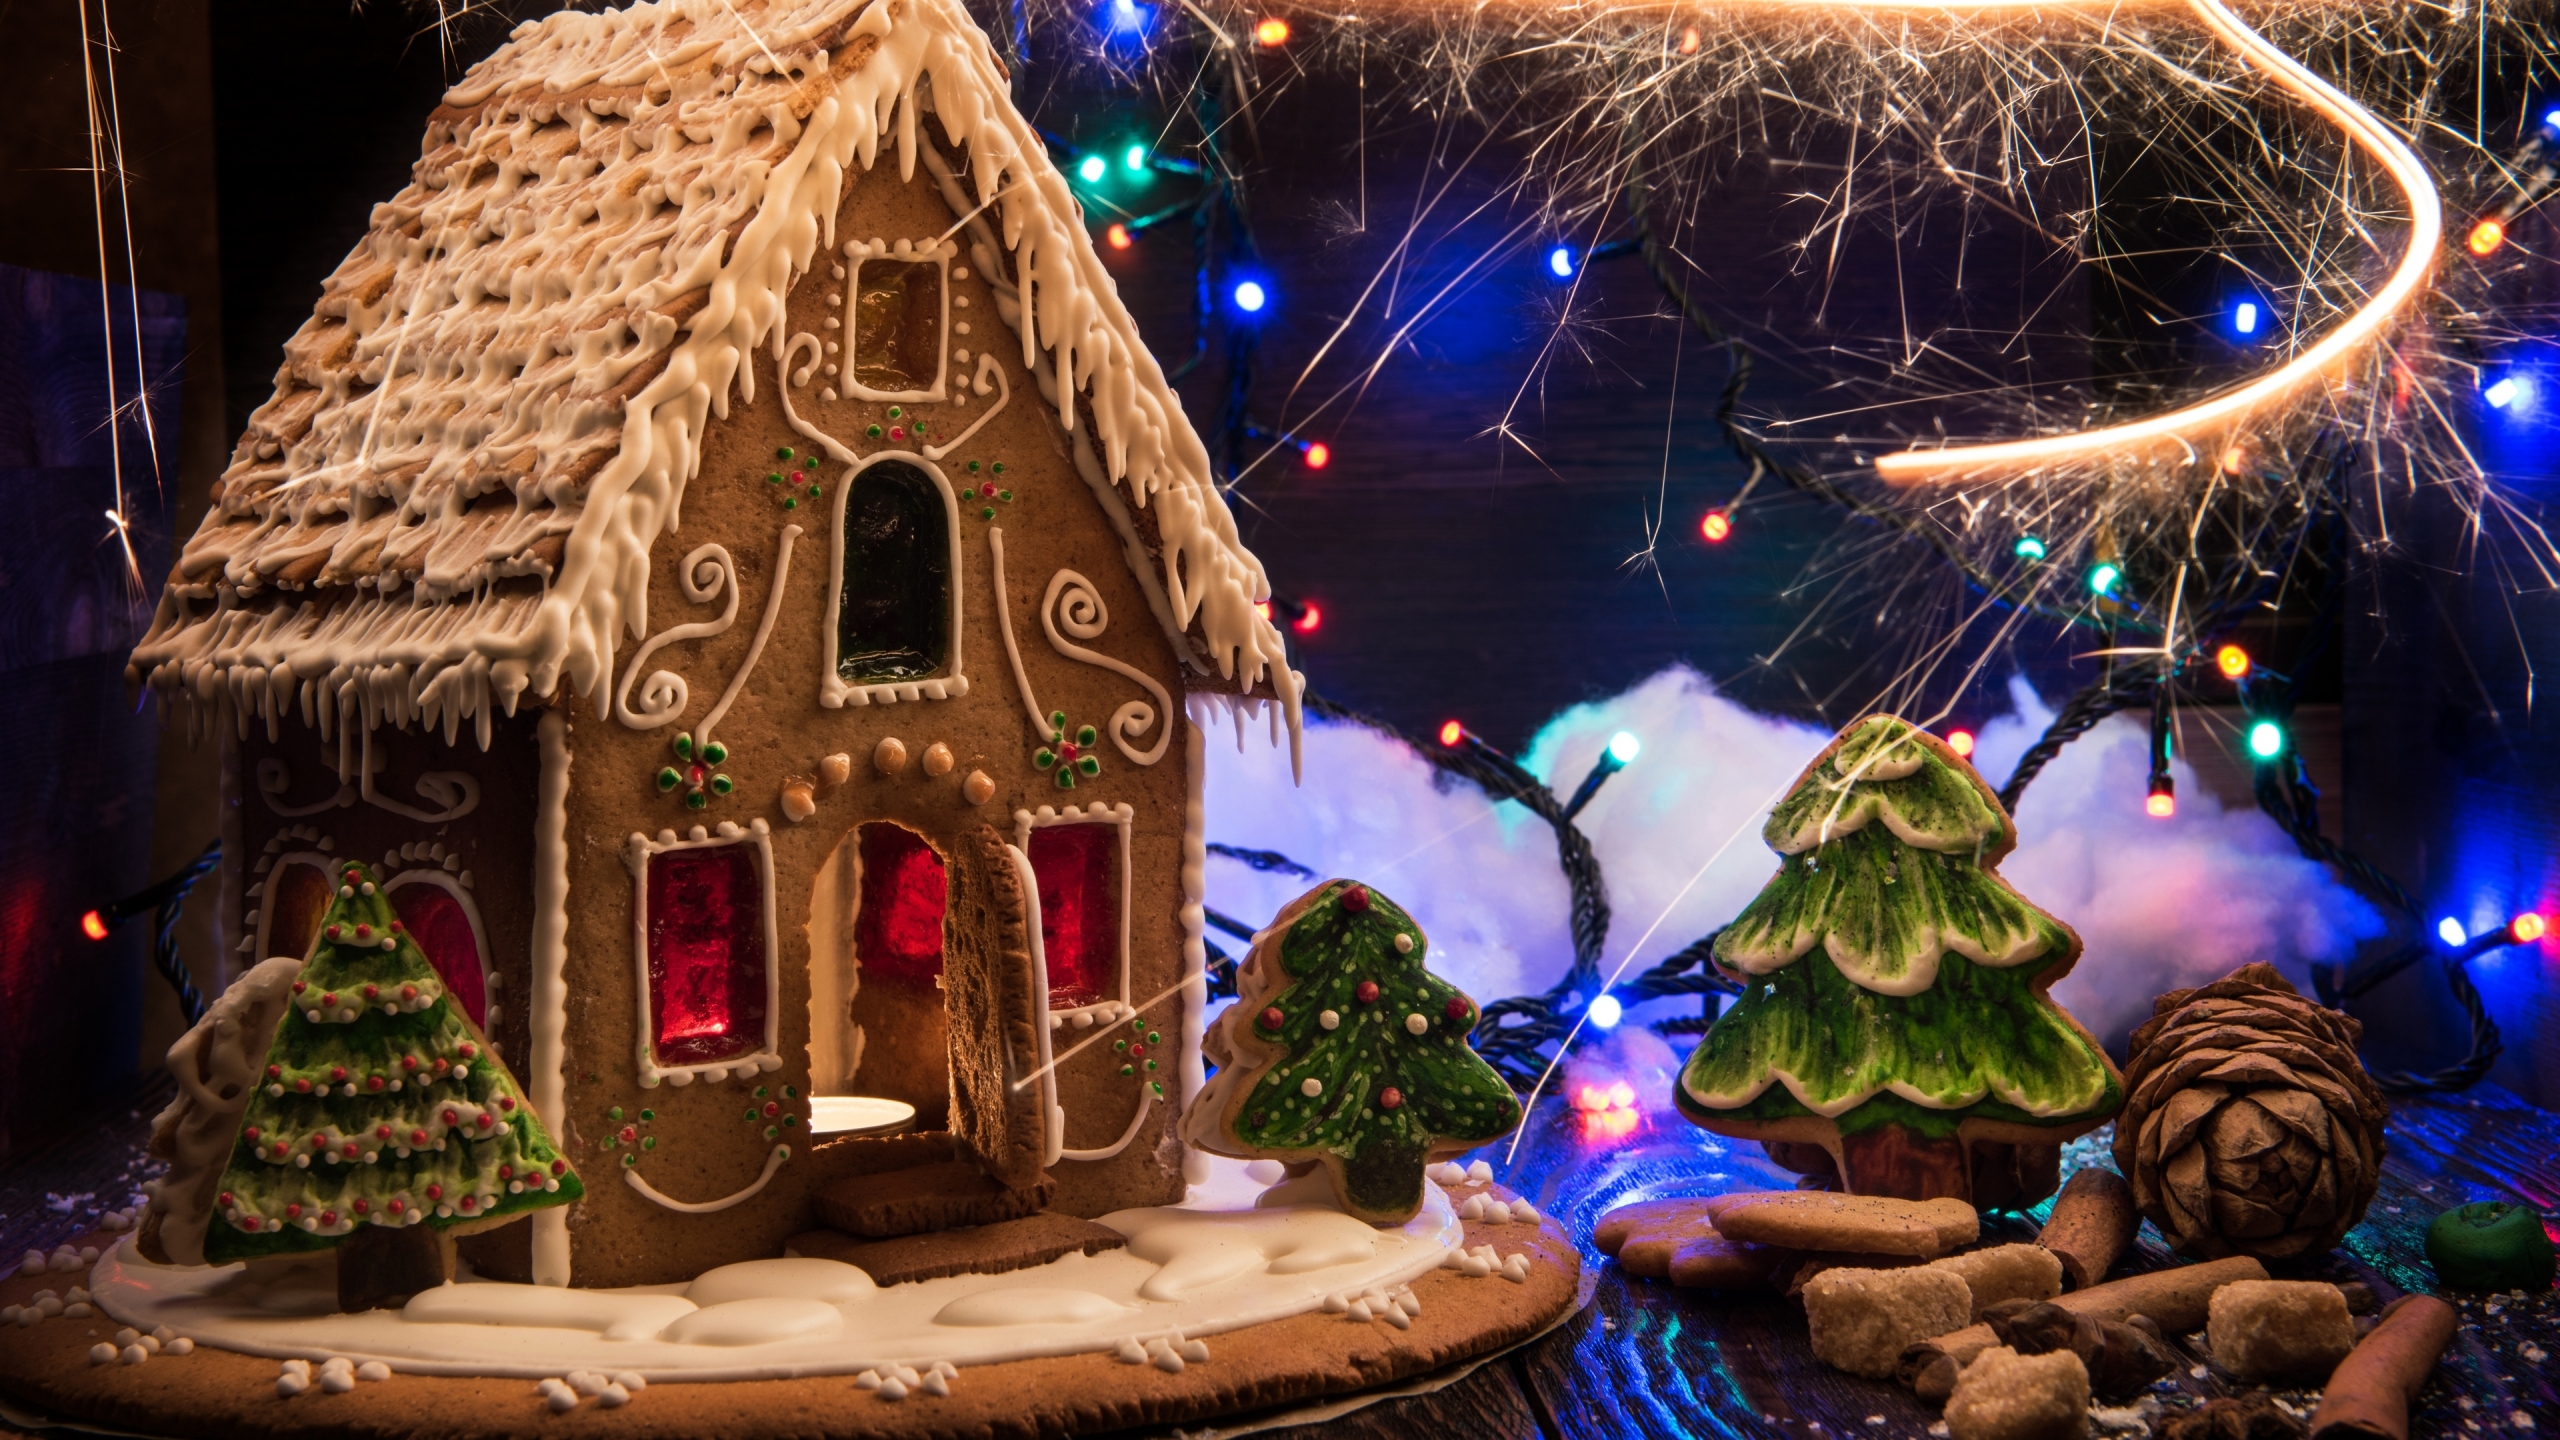 Christmas Gingerbread Decorations for 2560x1440 HDTV resolution